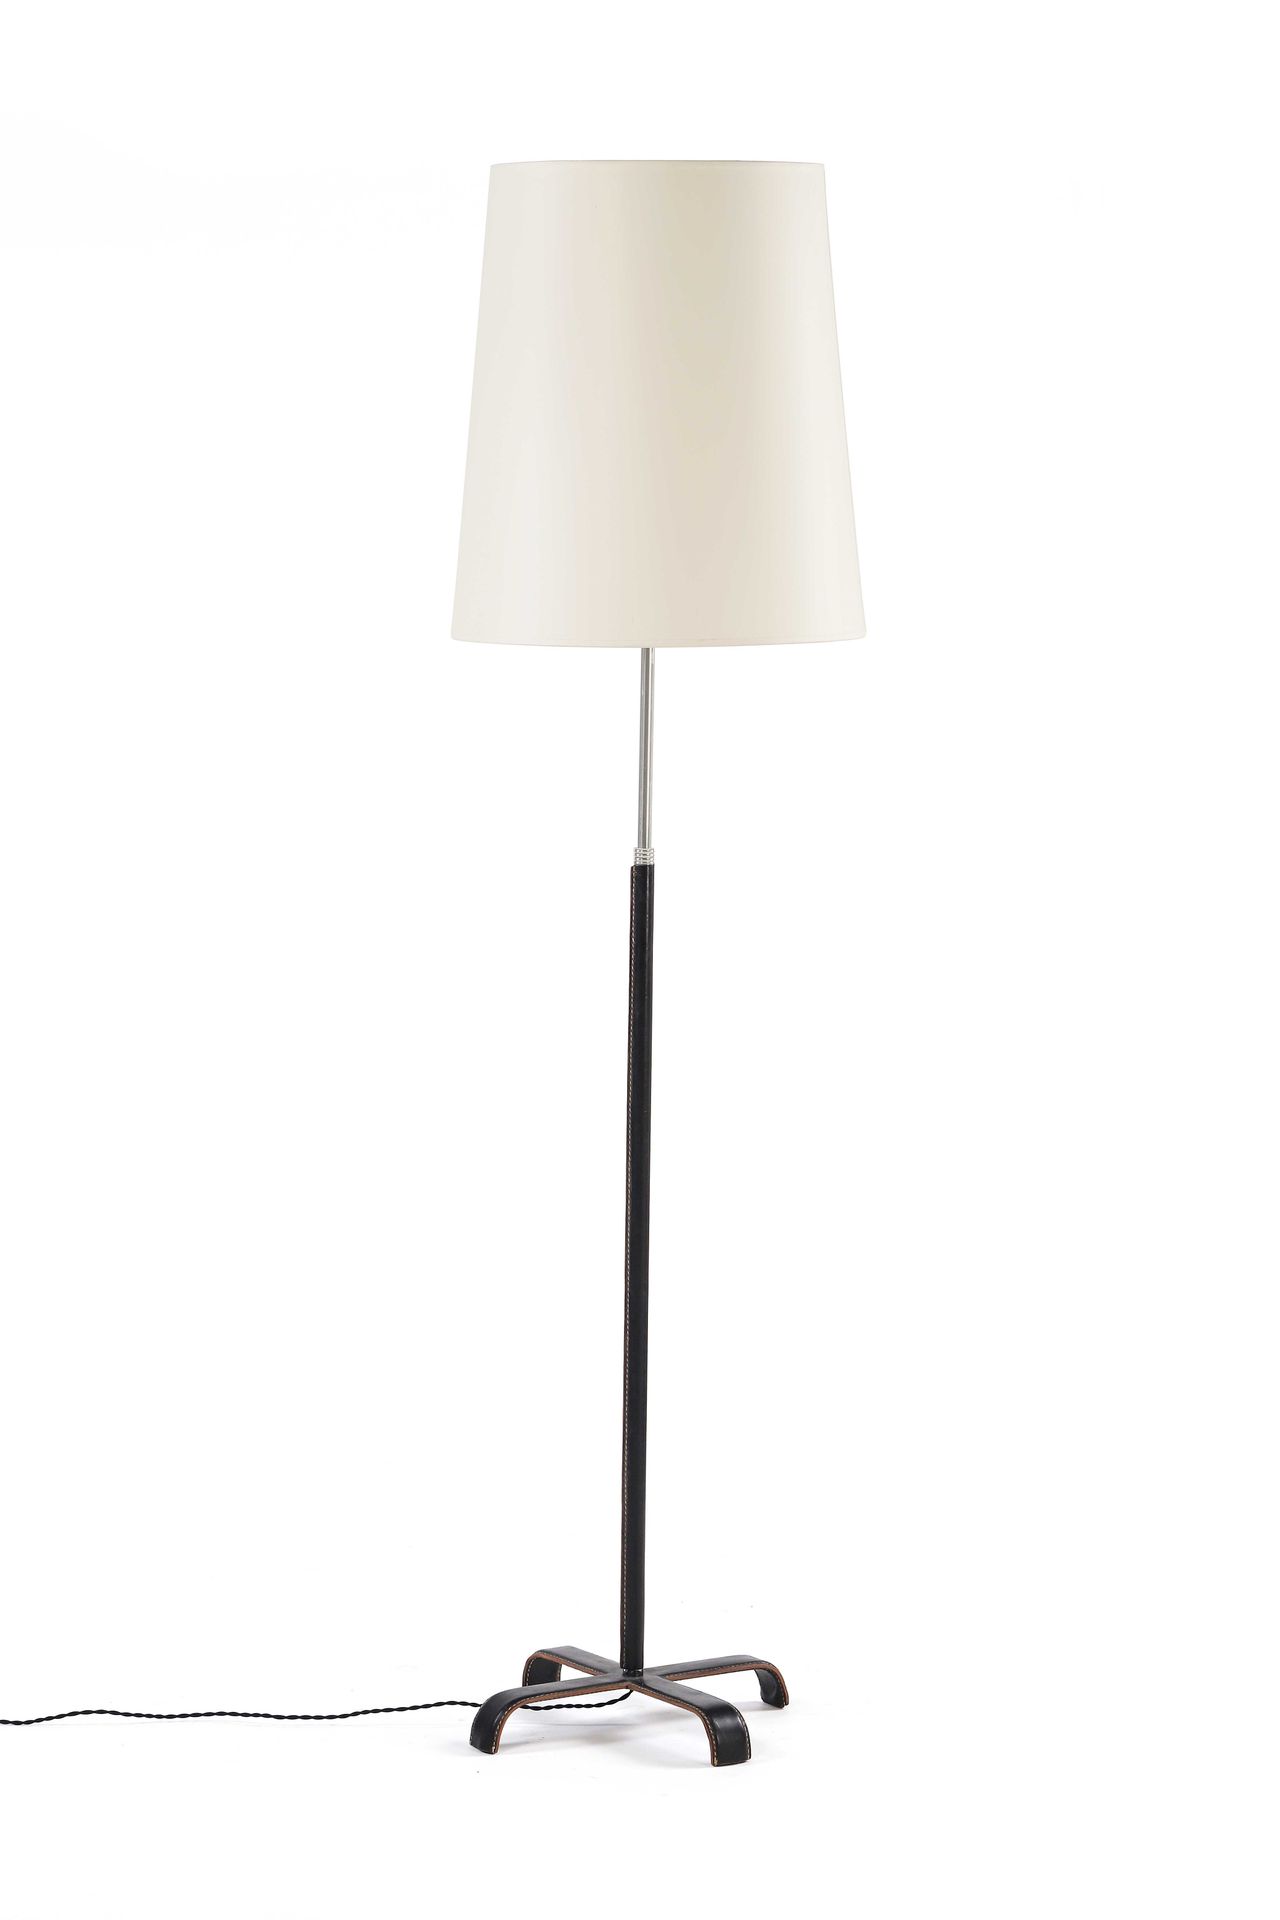 Jacques ADNET (1901-1984) Floor lamp
Leather, metal, brass
H. 150 cm.
Circa 1955&hellip;